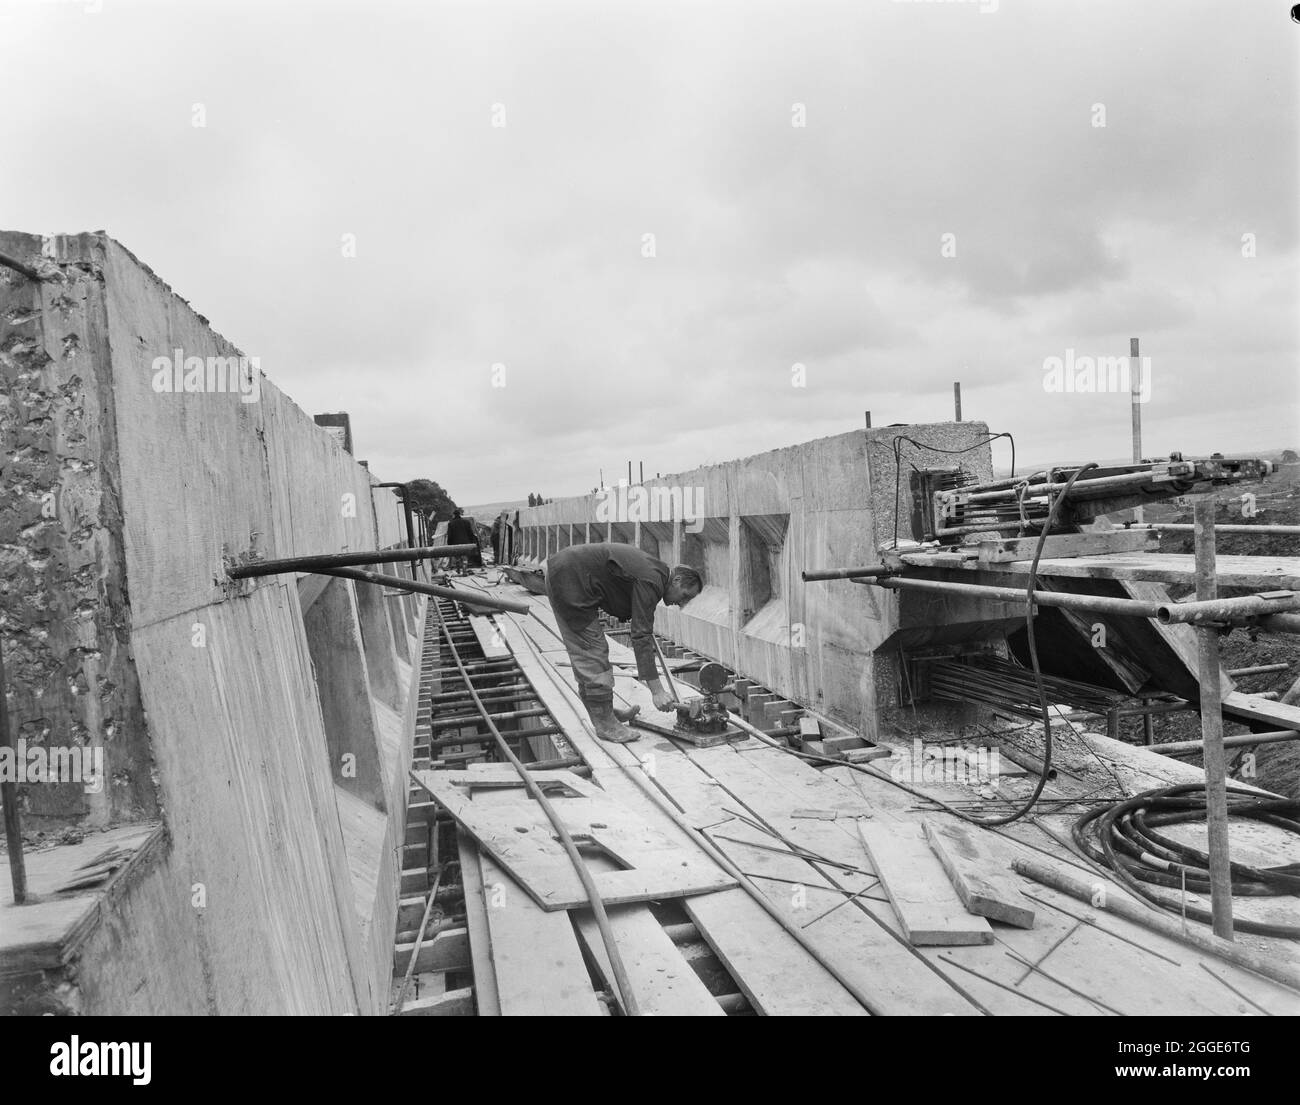 A view of the construction of Structure 306 (Barn Bank Lane bridge) on the Birmingham to Preston Motorway (M6), showing a worker carrying out stressing of the prestressed concrete. This road bridge, which is located at SJ9211419999, opened in March 1962. Stock Photo